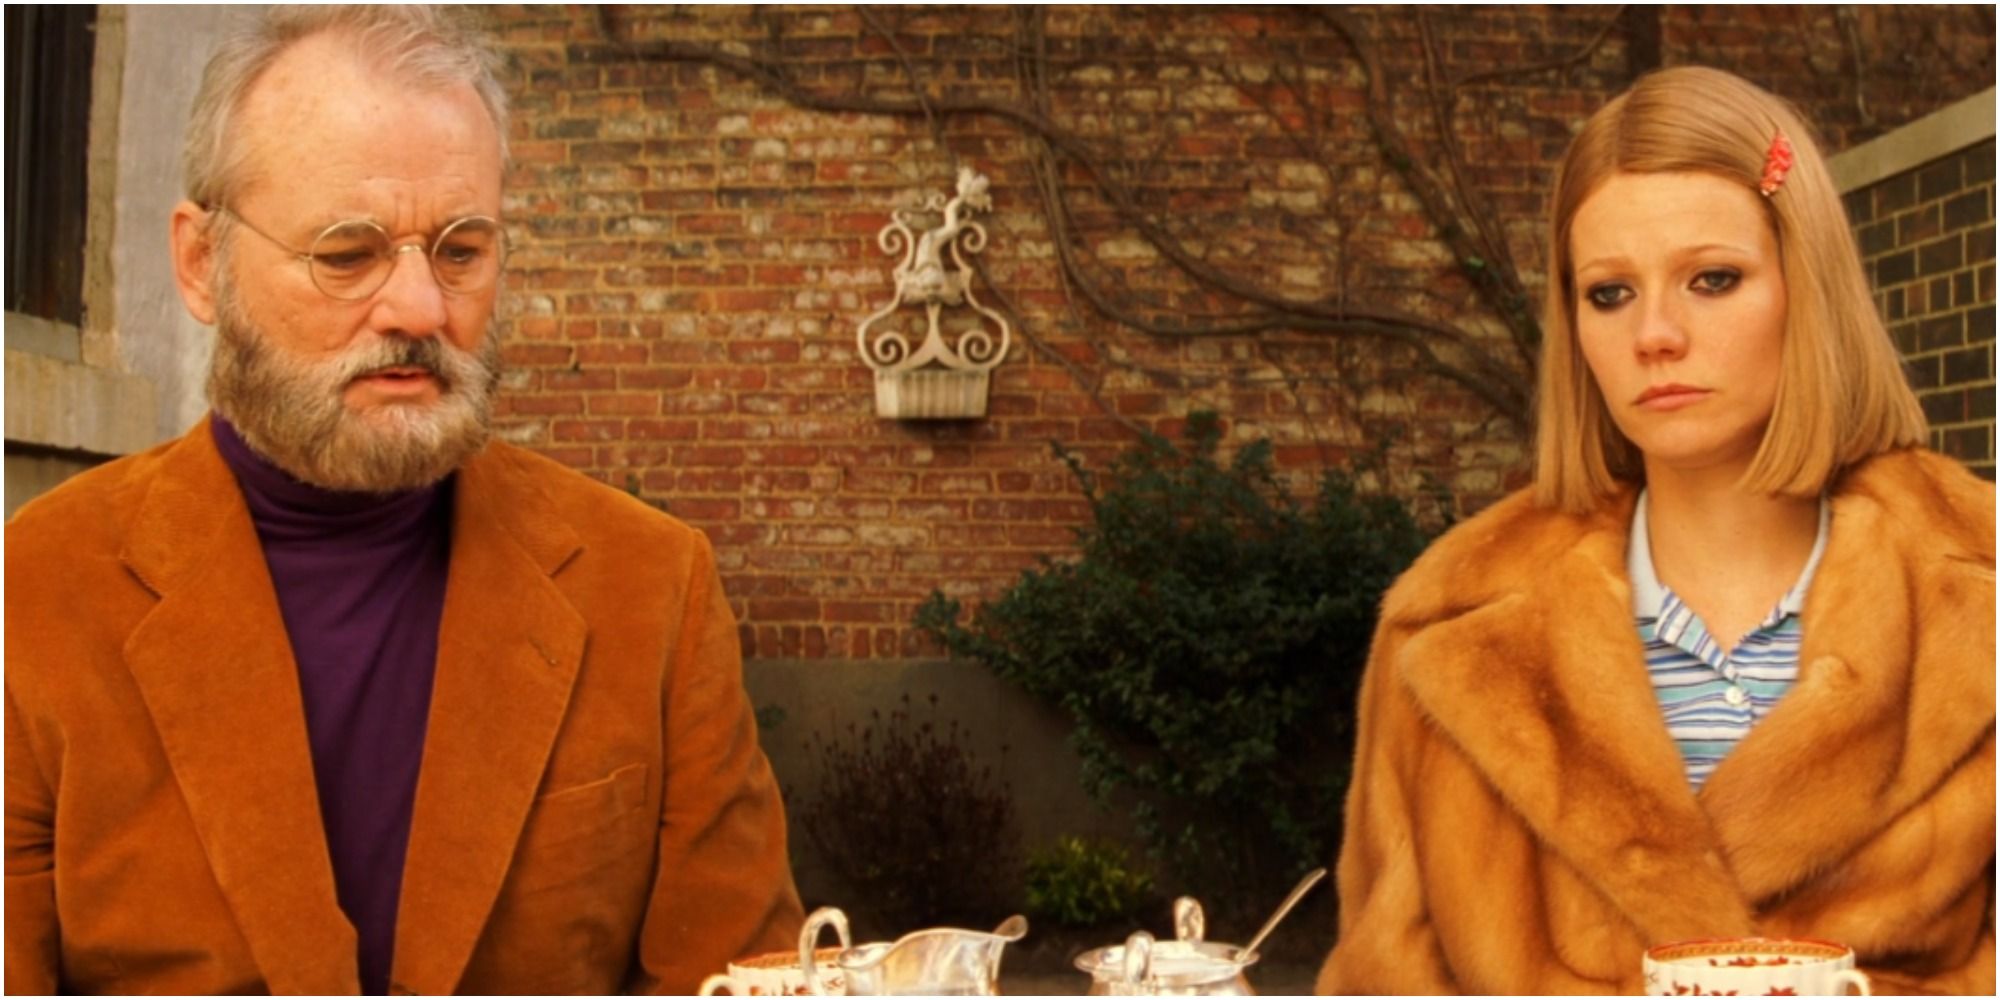 5 Best (& 5 Worst) Couples in Wes Anderson Movies